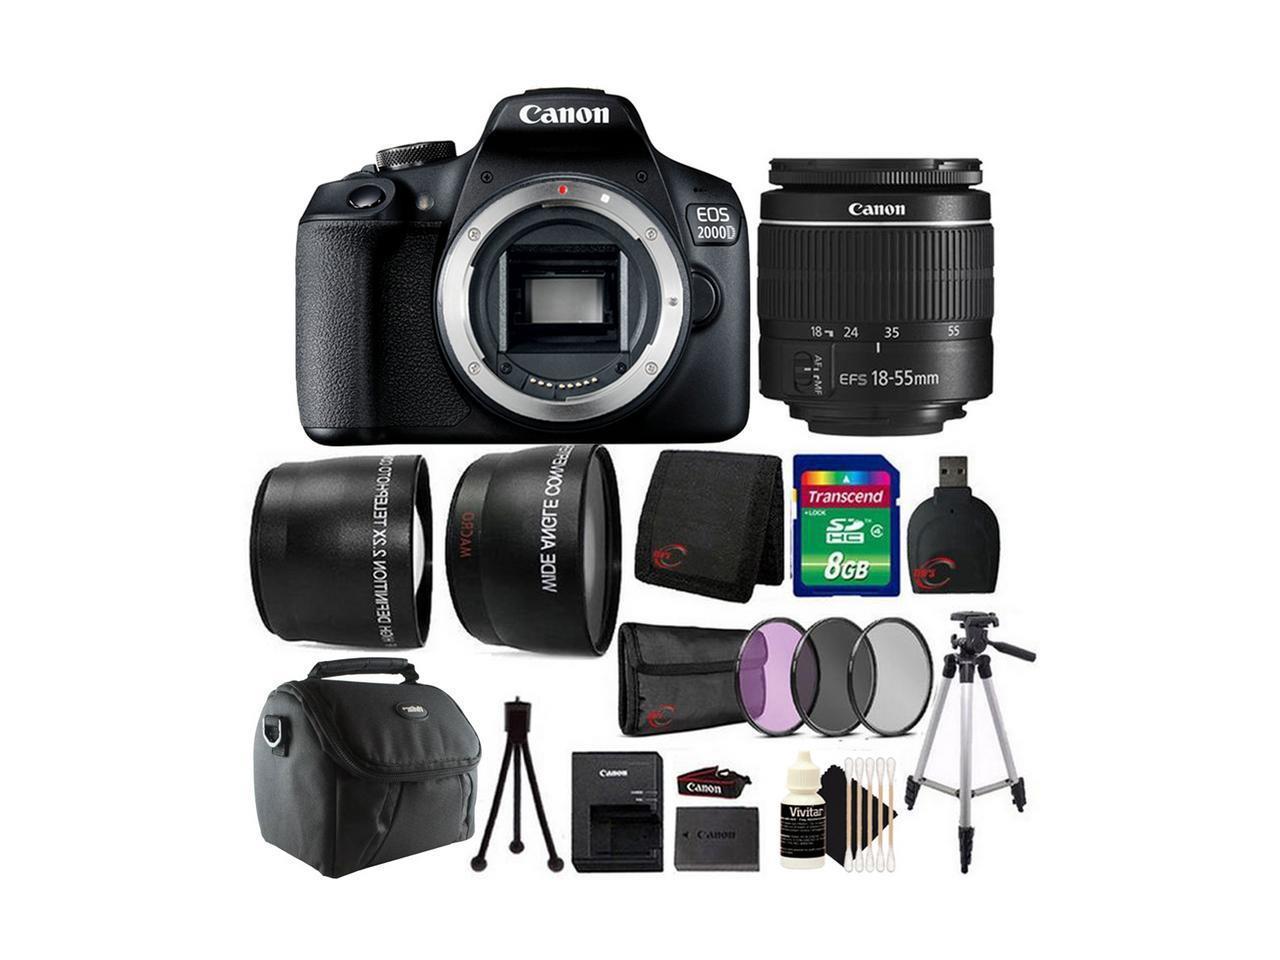 Canon EOS 2000D / Rebel T7 24.1MP Digital SLR Camera + 18-55mm Lens + All You Need Accessory